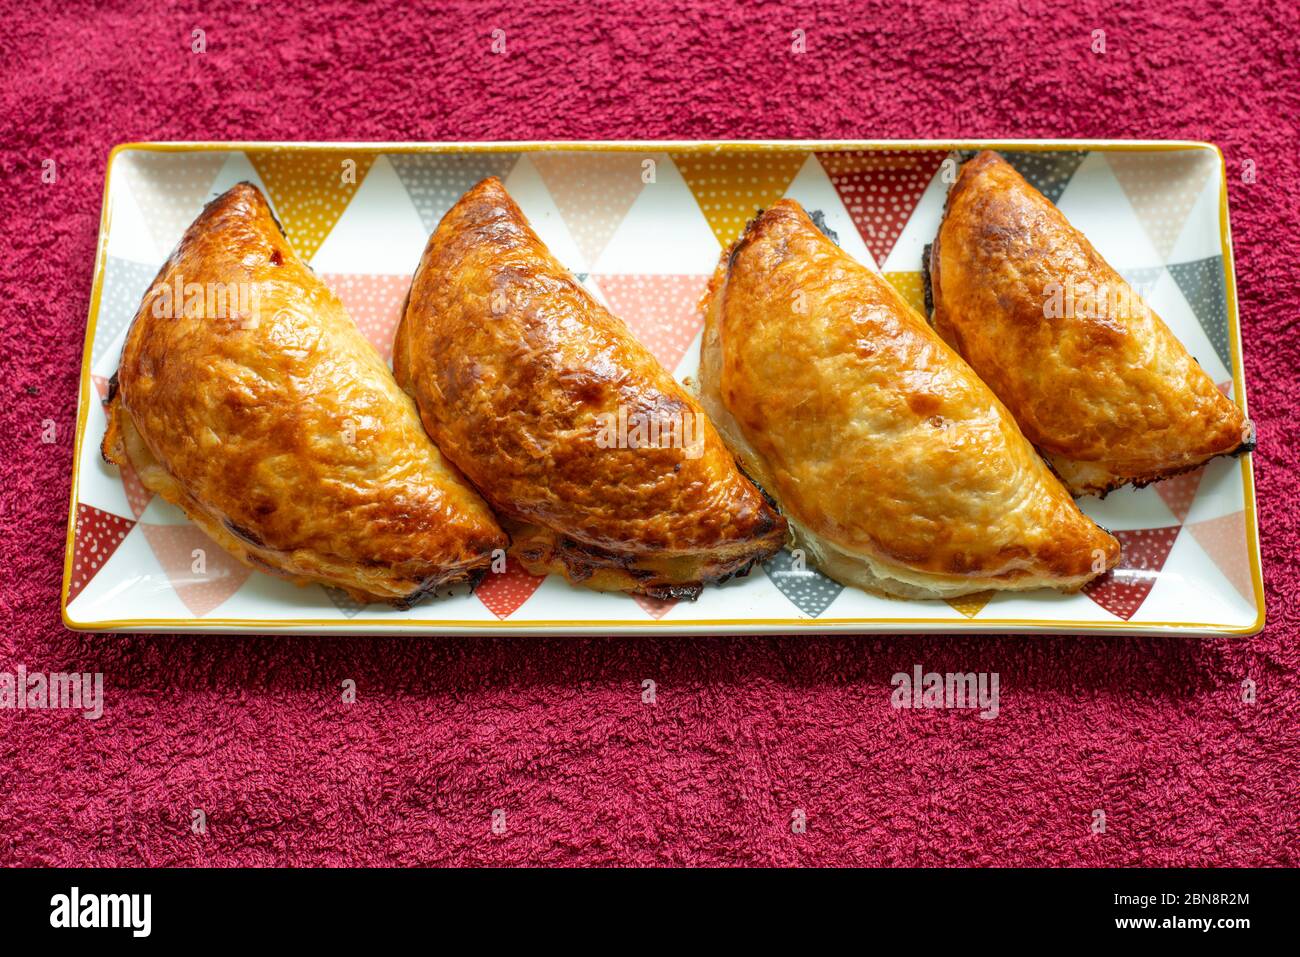 Four nicely browned homemade pastries (apple and pear rissoles) Stock Photo